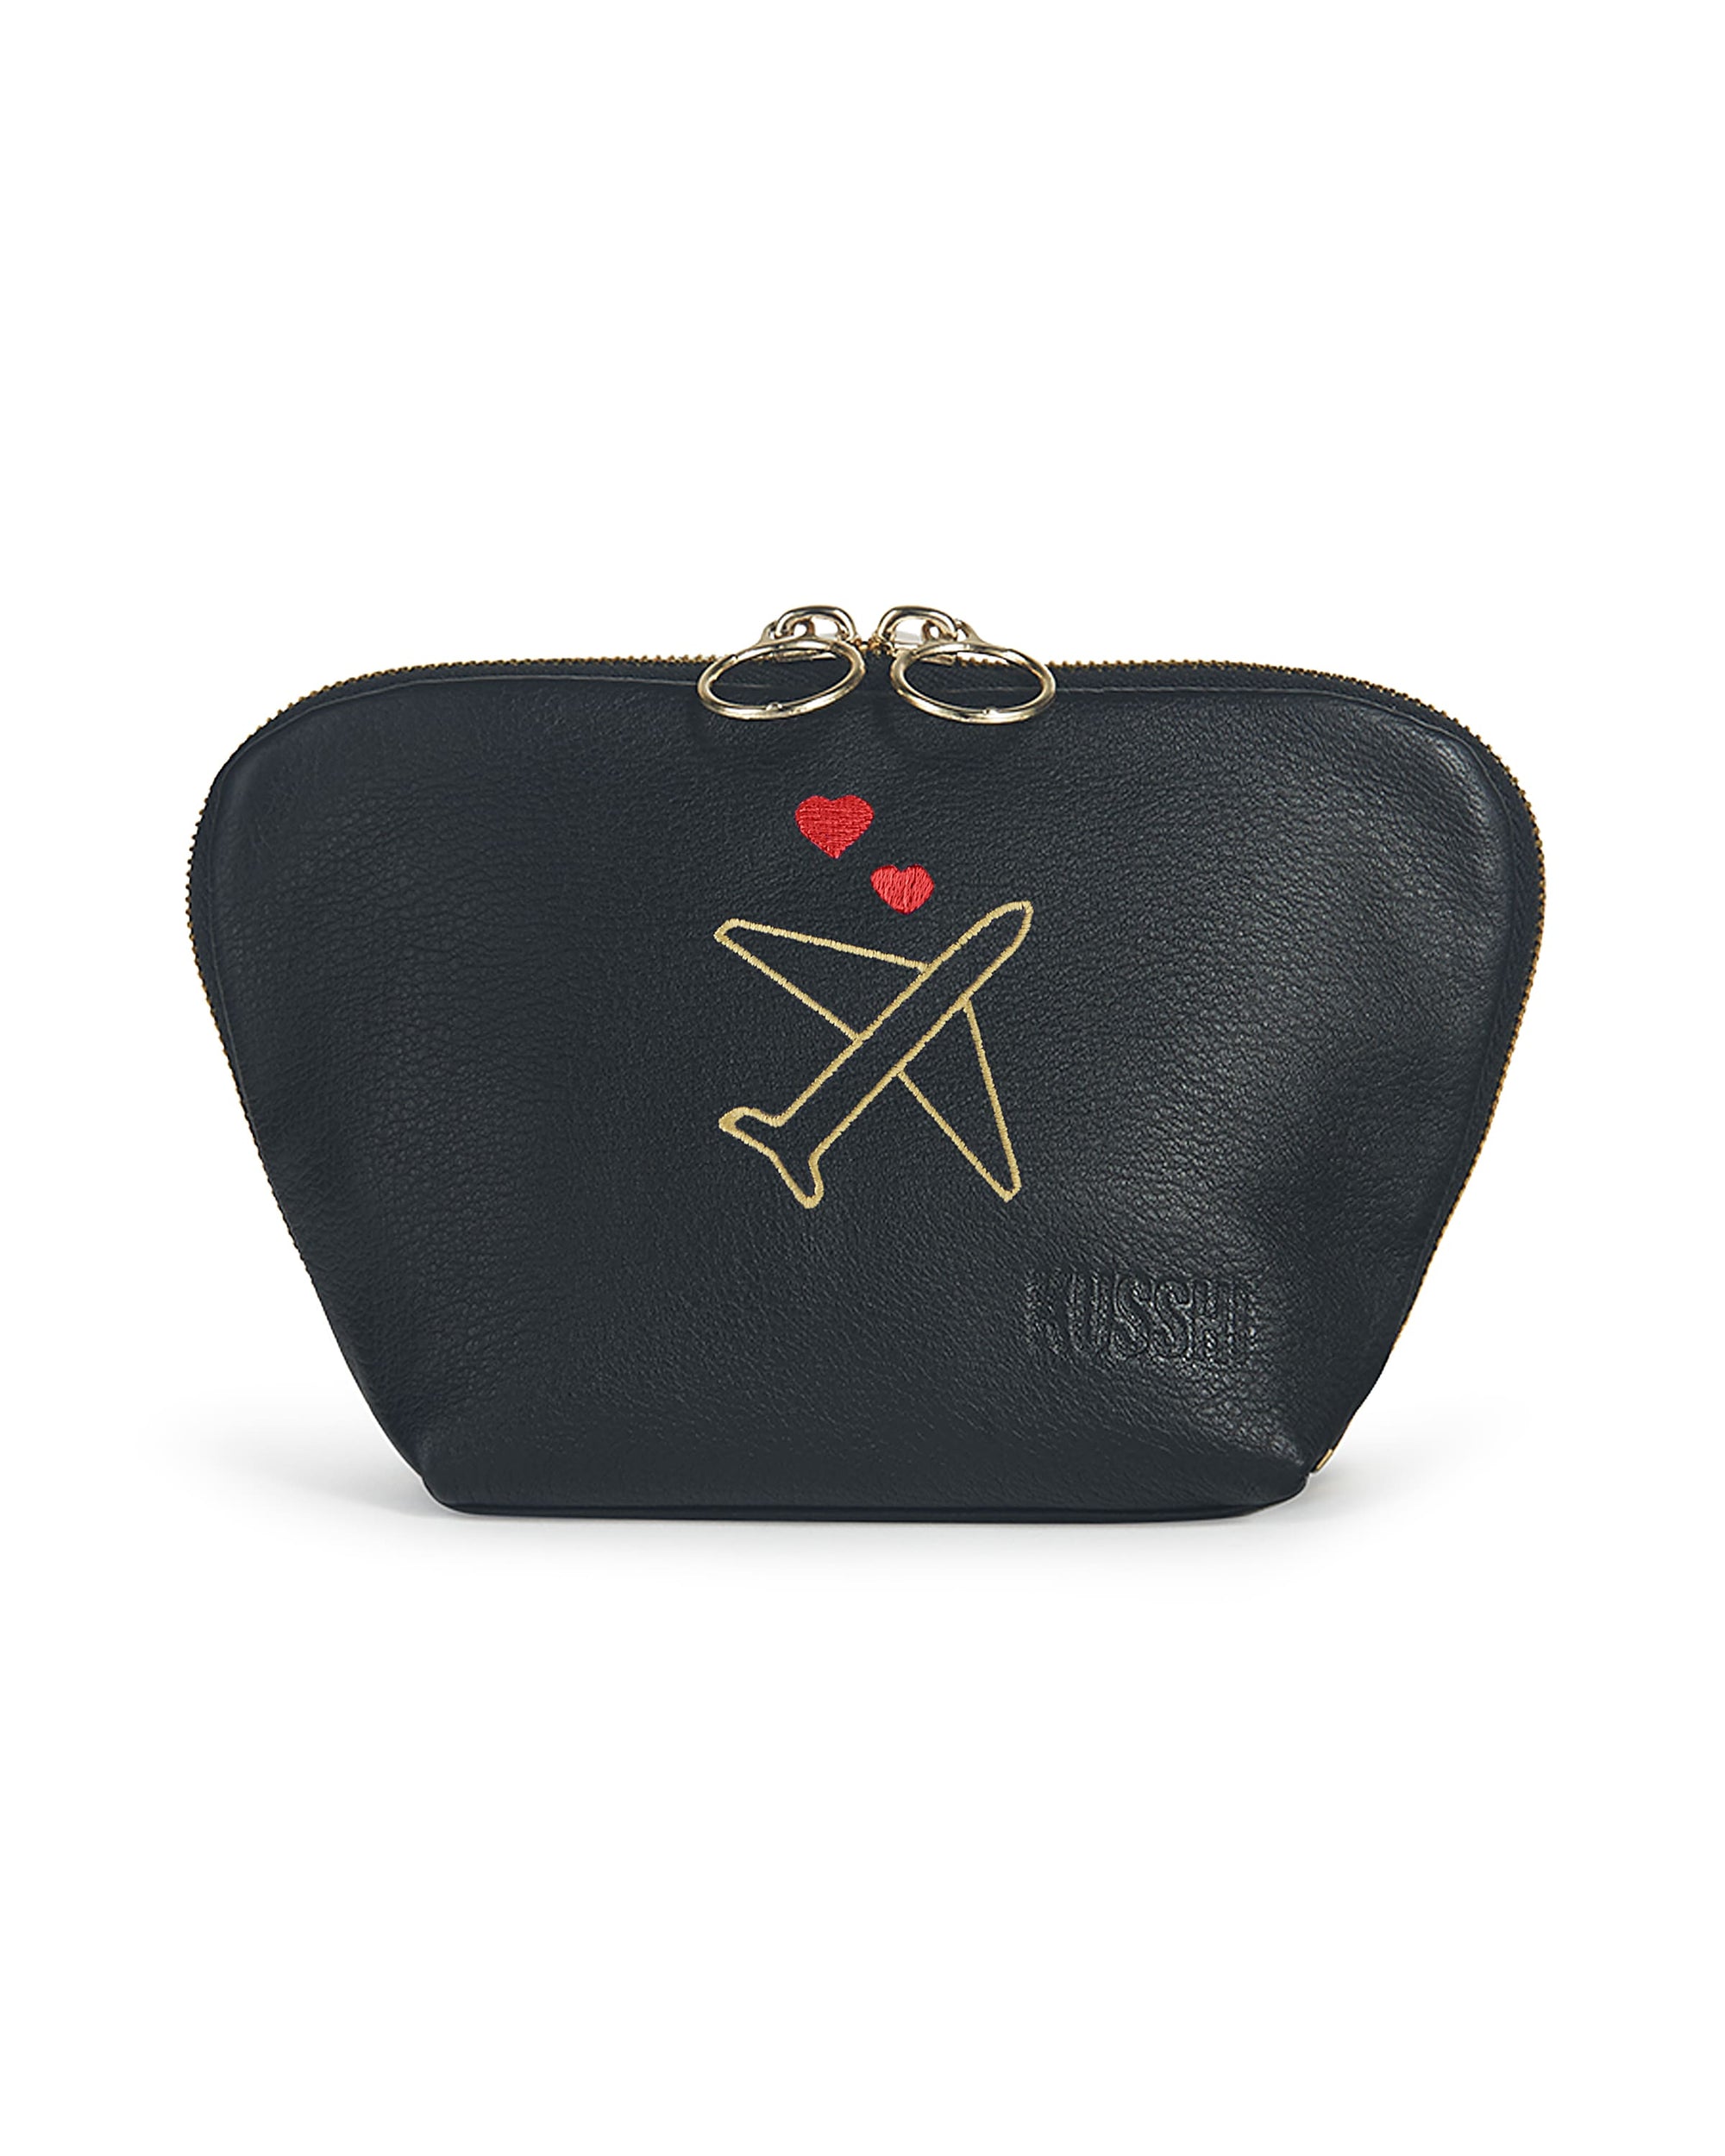 color: Everyday+ Luxurious Black Leather with Zebra Interior; alt: Everyday Small Size Makeup Bag | KUSSHI